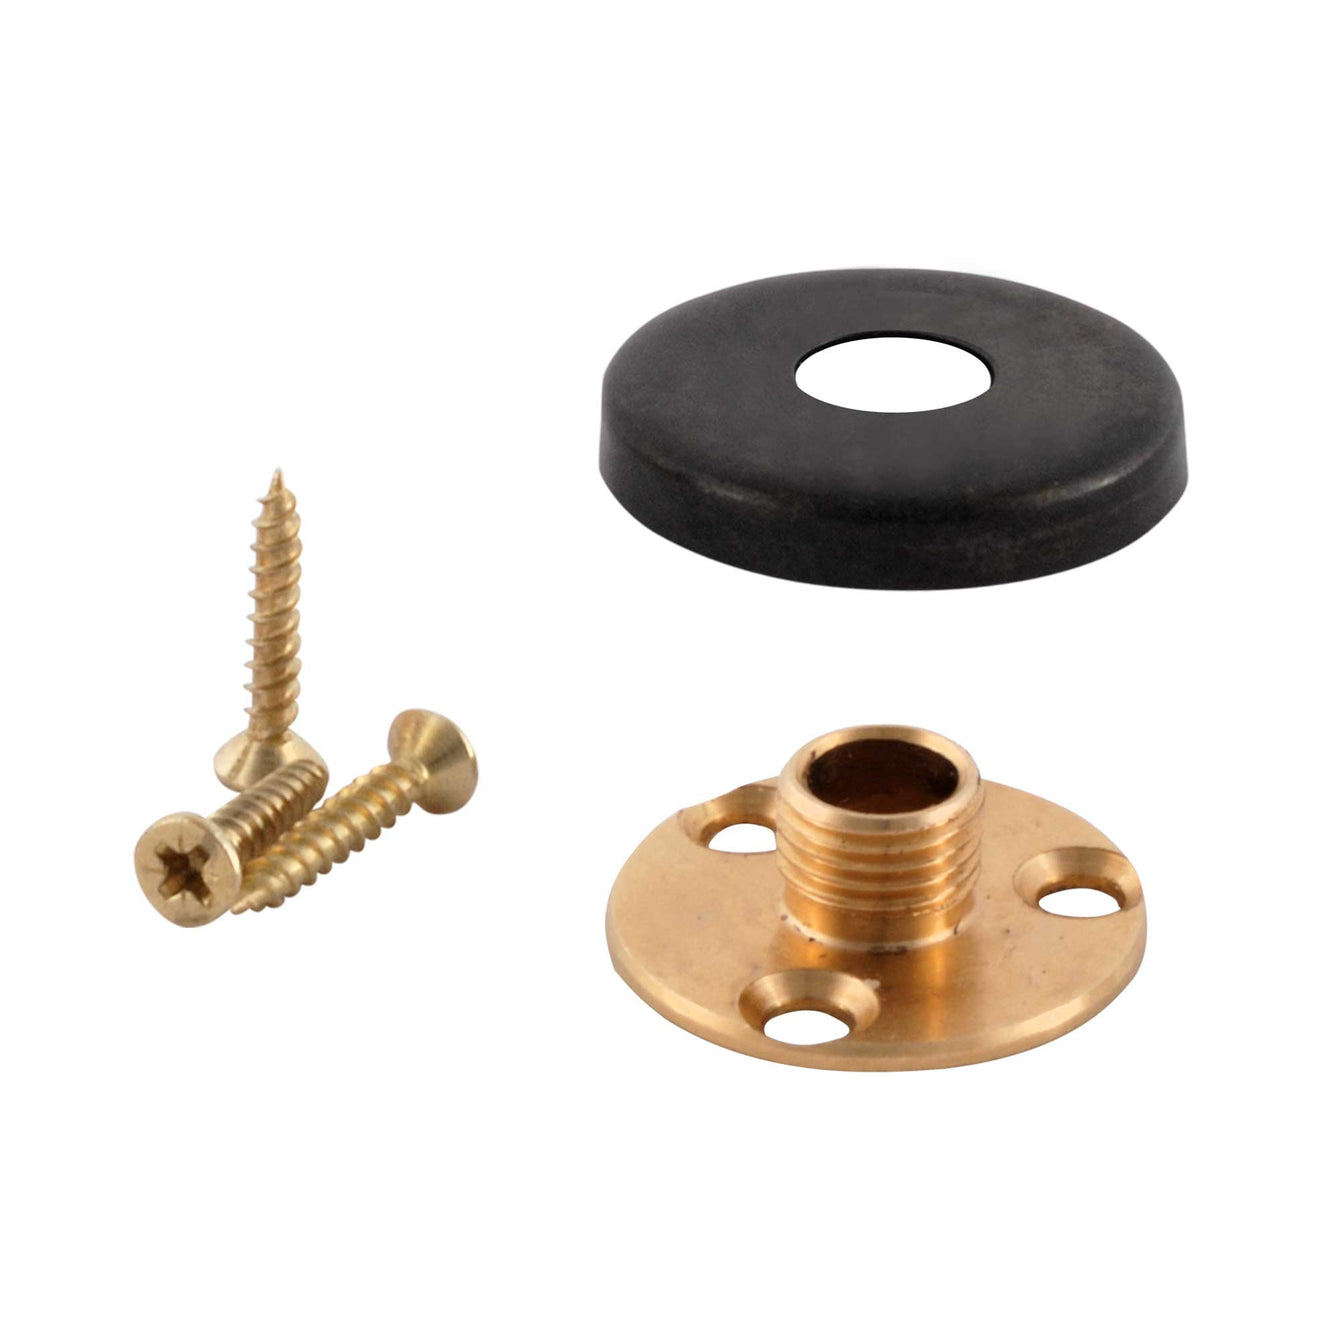 ElekTek Male Thread Back Plate Mount Cover and Screws - For use with B22 E27 Lamp holders Bronze (Brushed Antique) / Half Inch